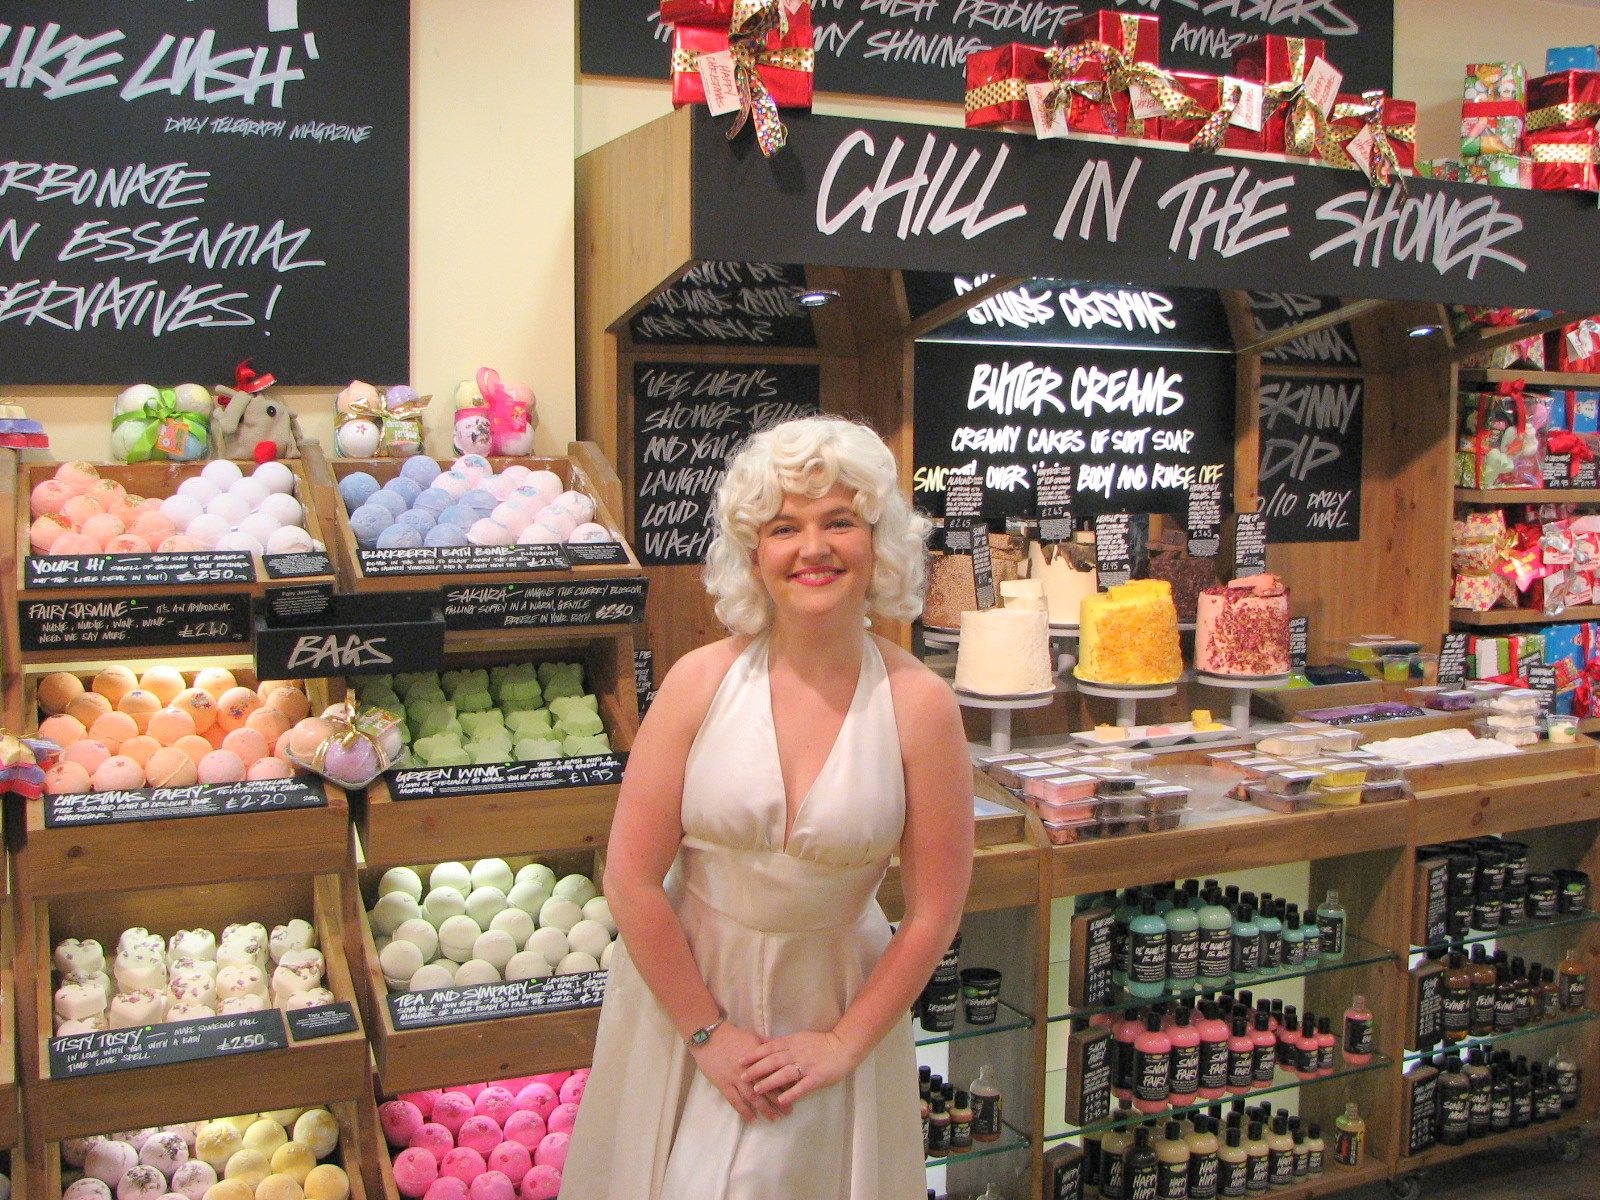 Wallpaper, portrait, street, shower, York, supermarket, Confectionery, shop, woman, bakery, marilynmonroe, flags, display, lush, marketplace, breasts, retail, whitedress, wig, produce, product, flavor, buttercream, shopkeeper, grocery store, local